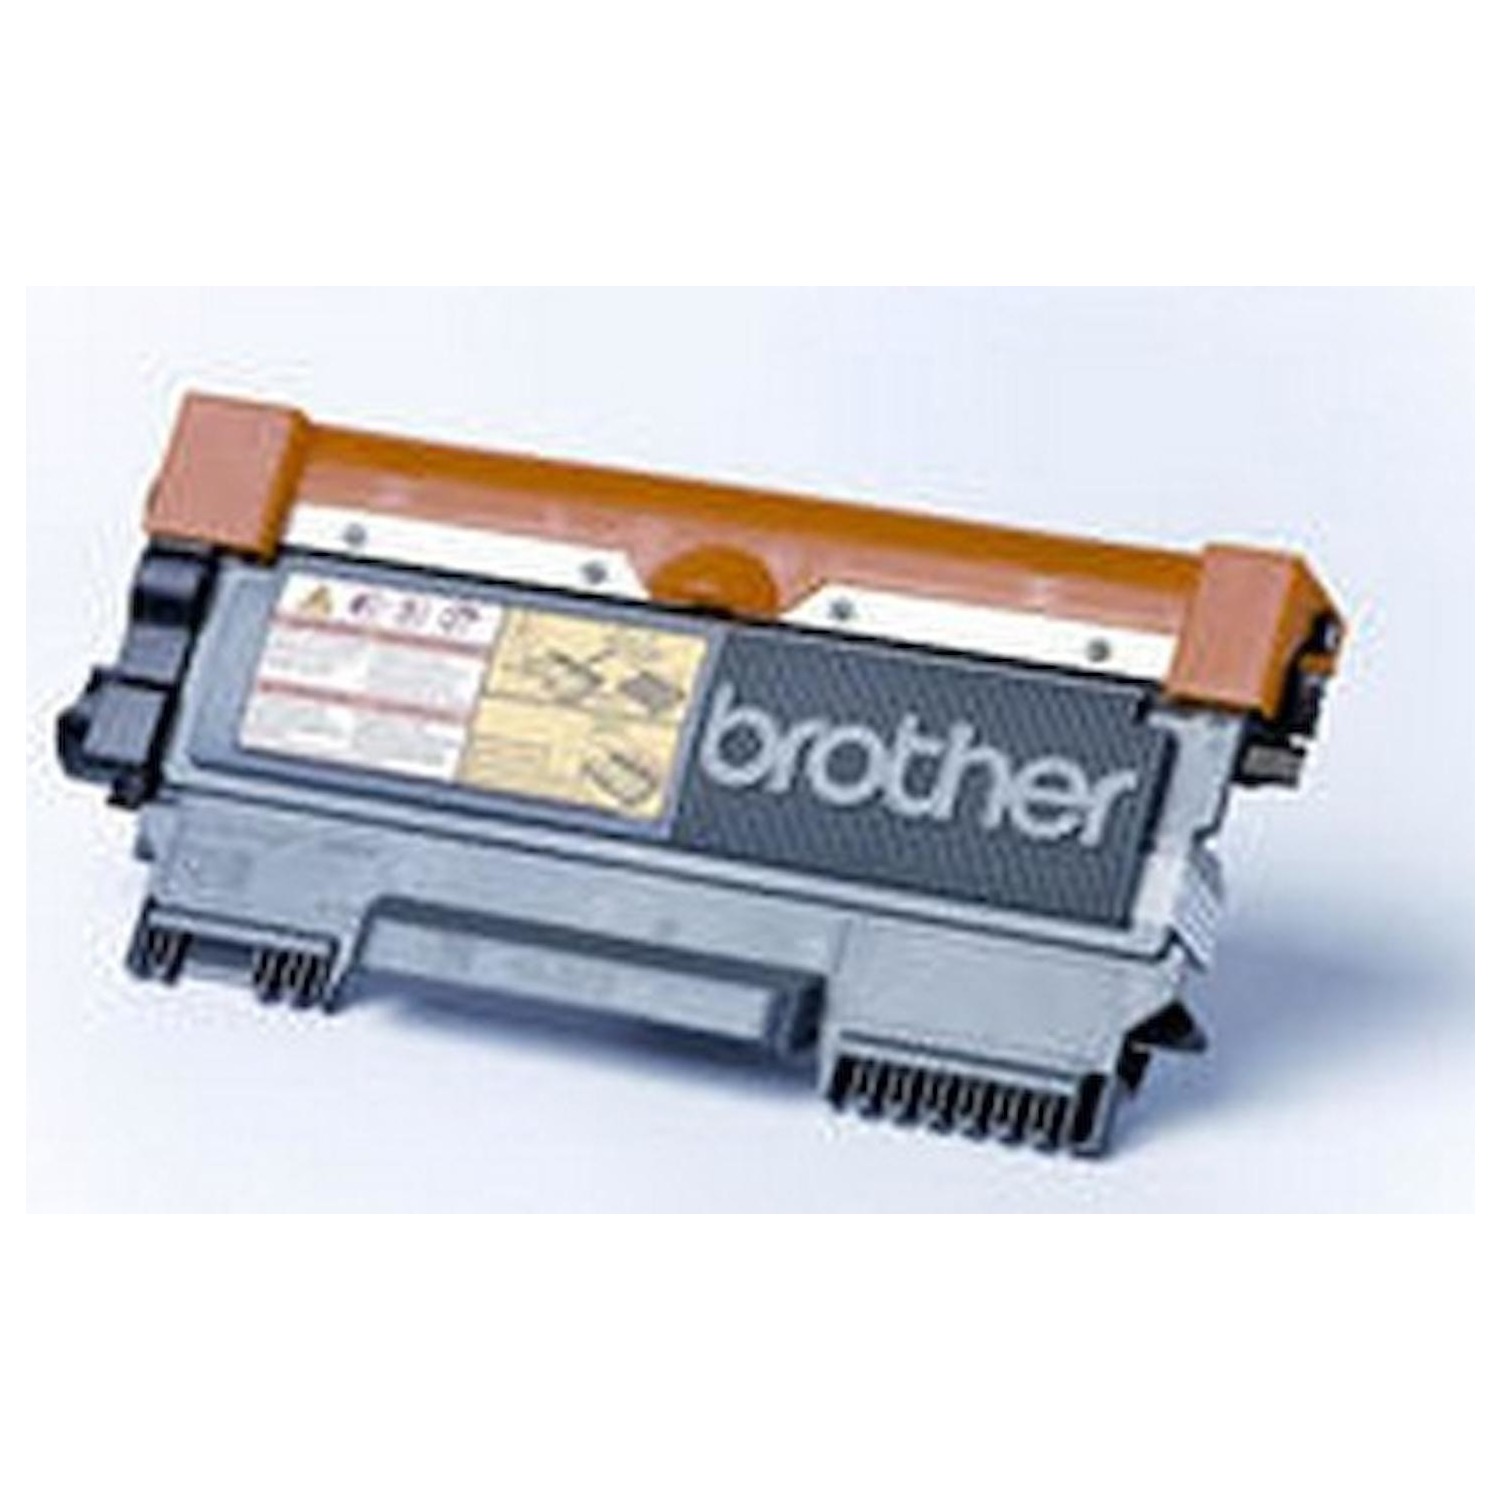 Toner Brother TN1050 per DCP1512A 1612W HL-1212W DCP1612W MFC1810 -  DIMOStore